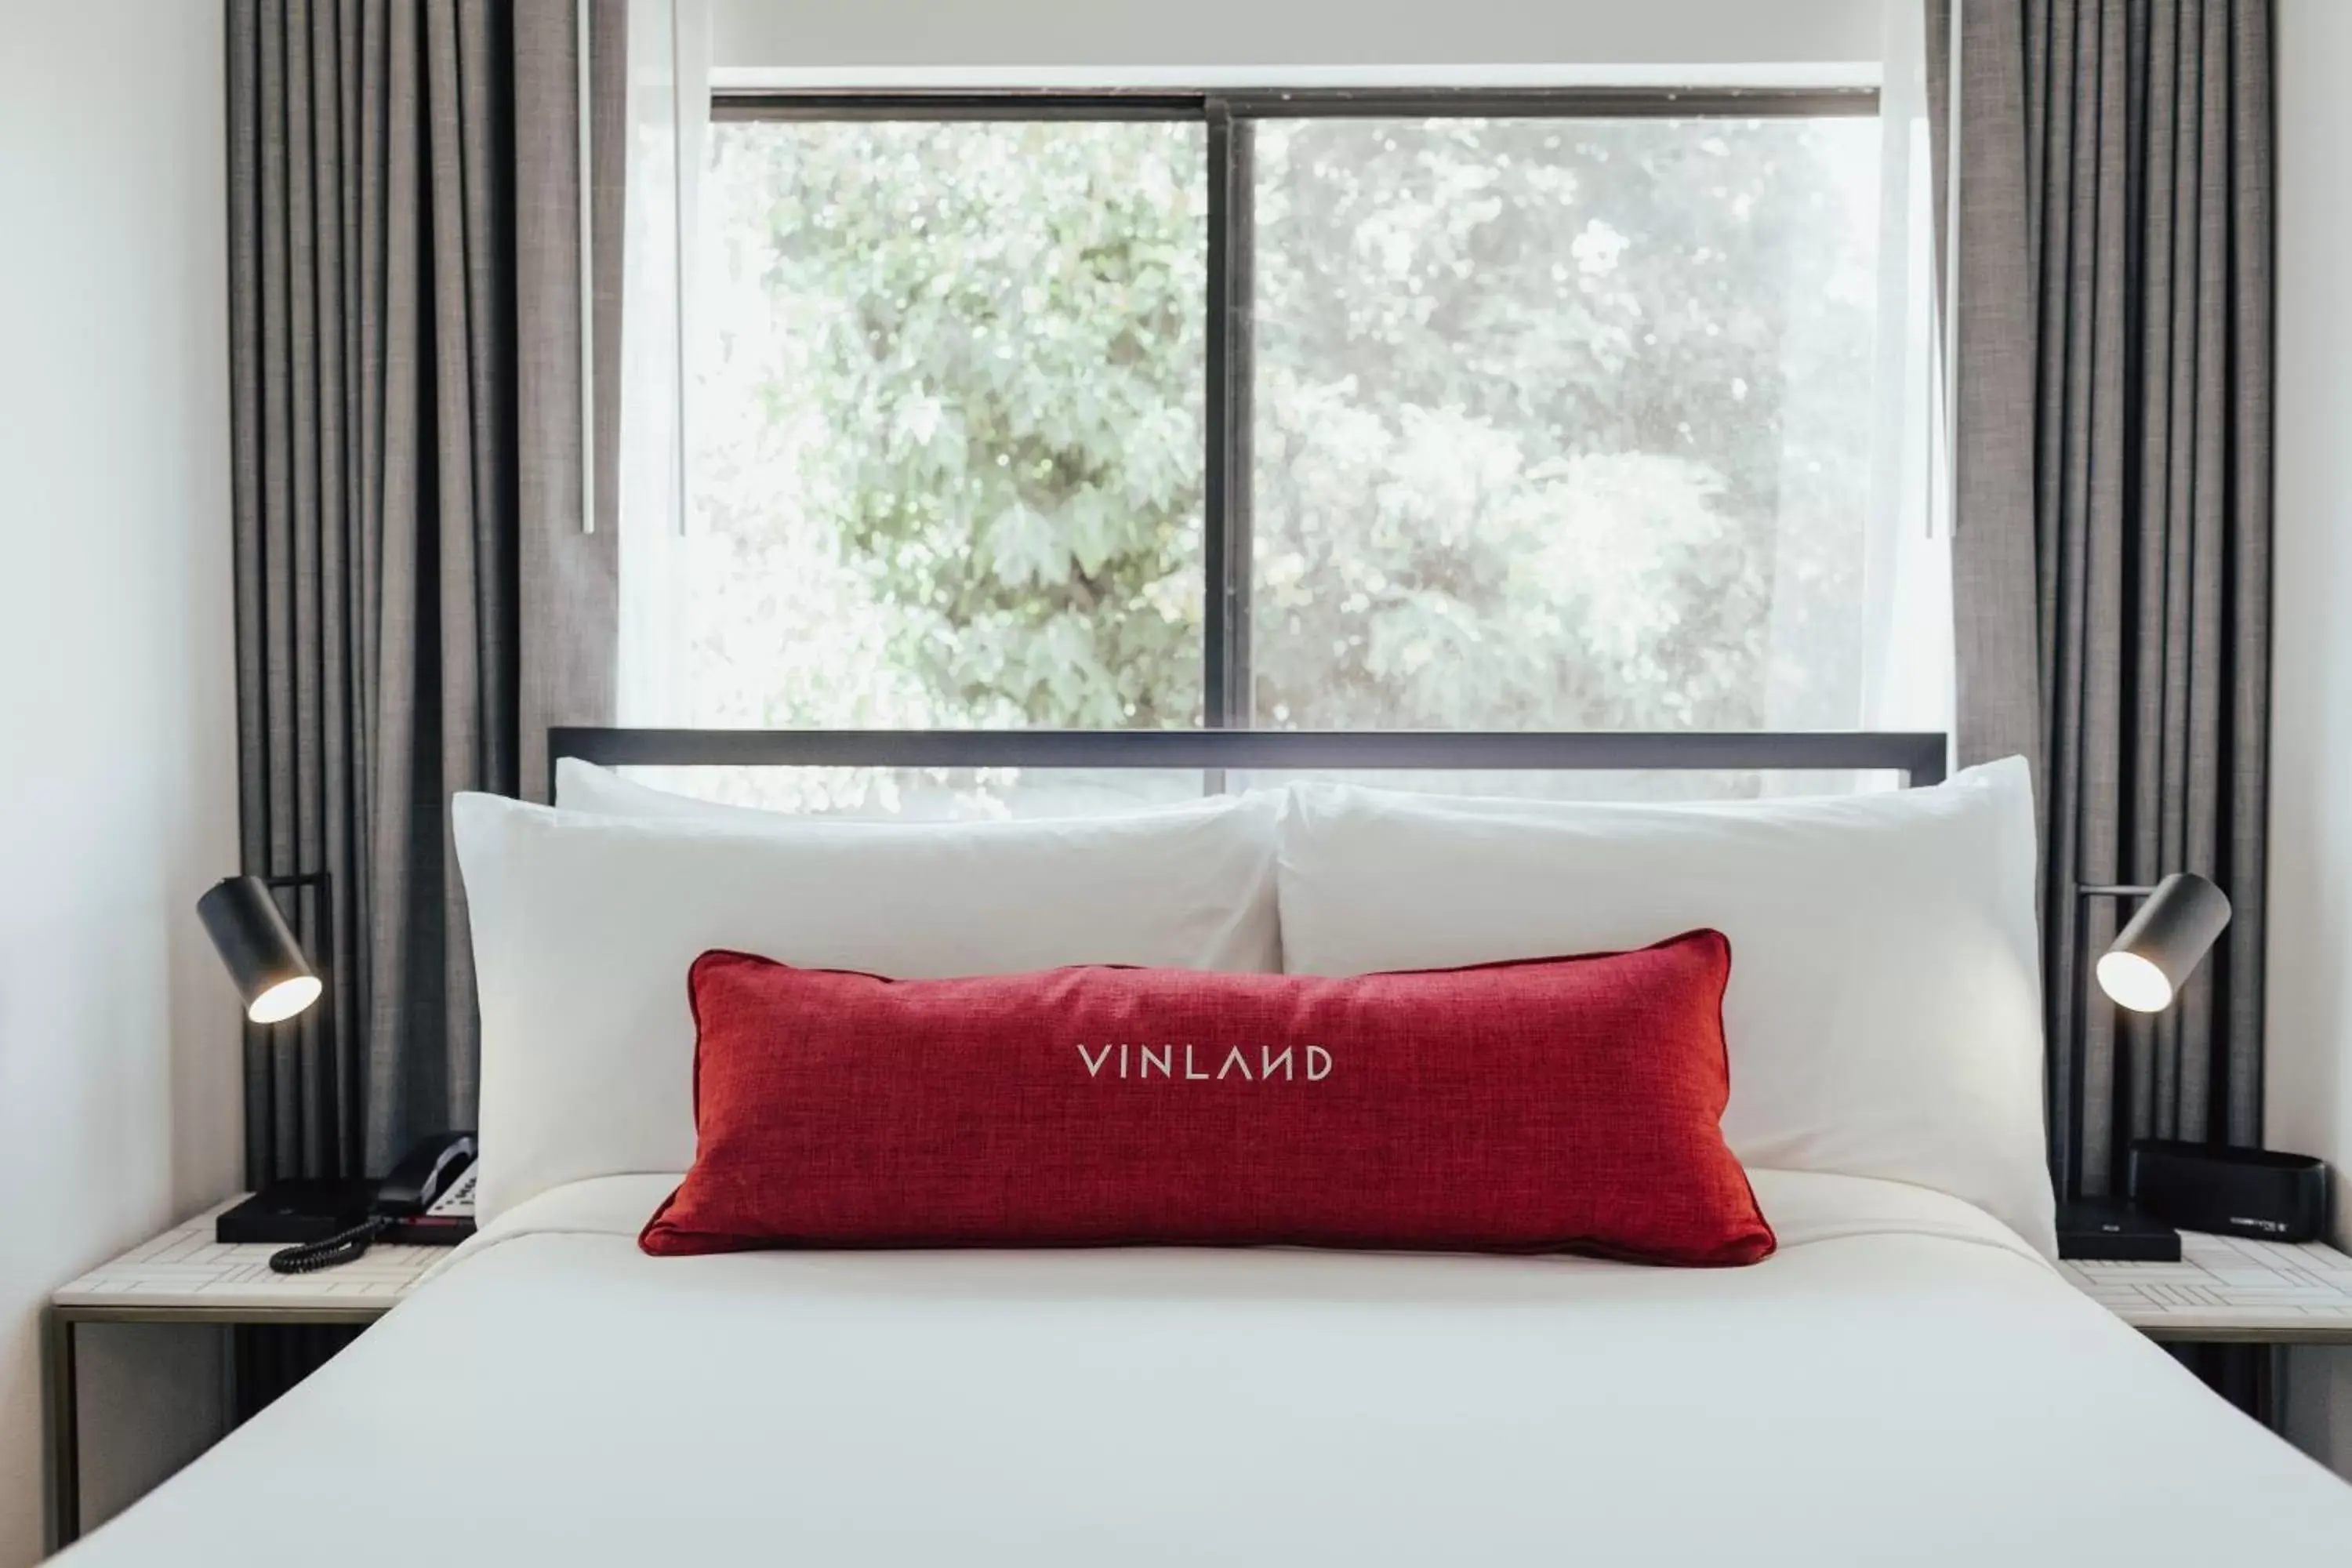 Vinland Hotel and Lounge